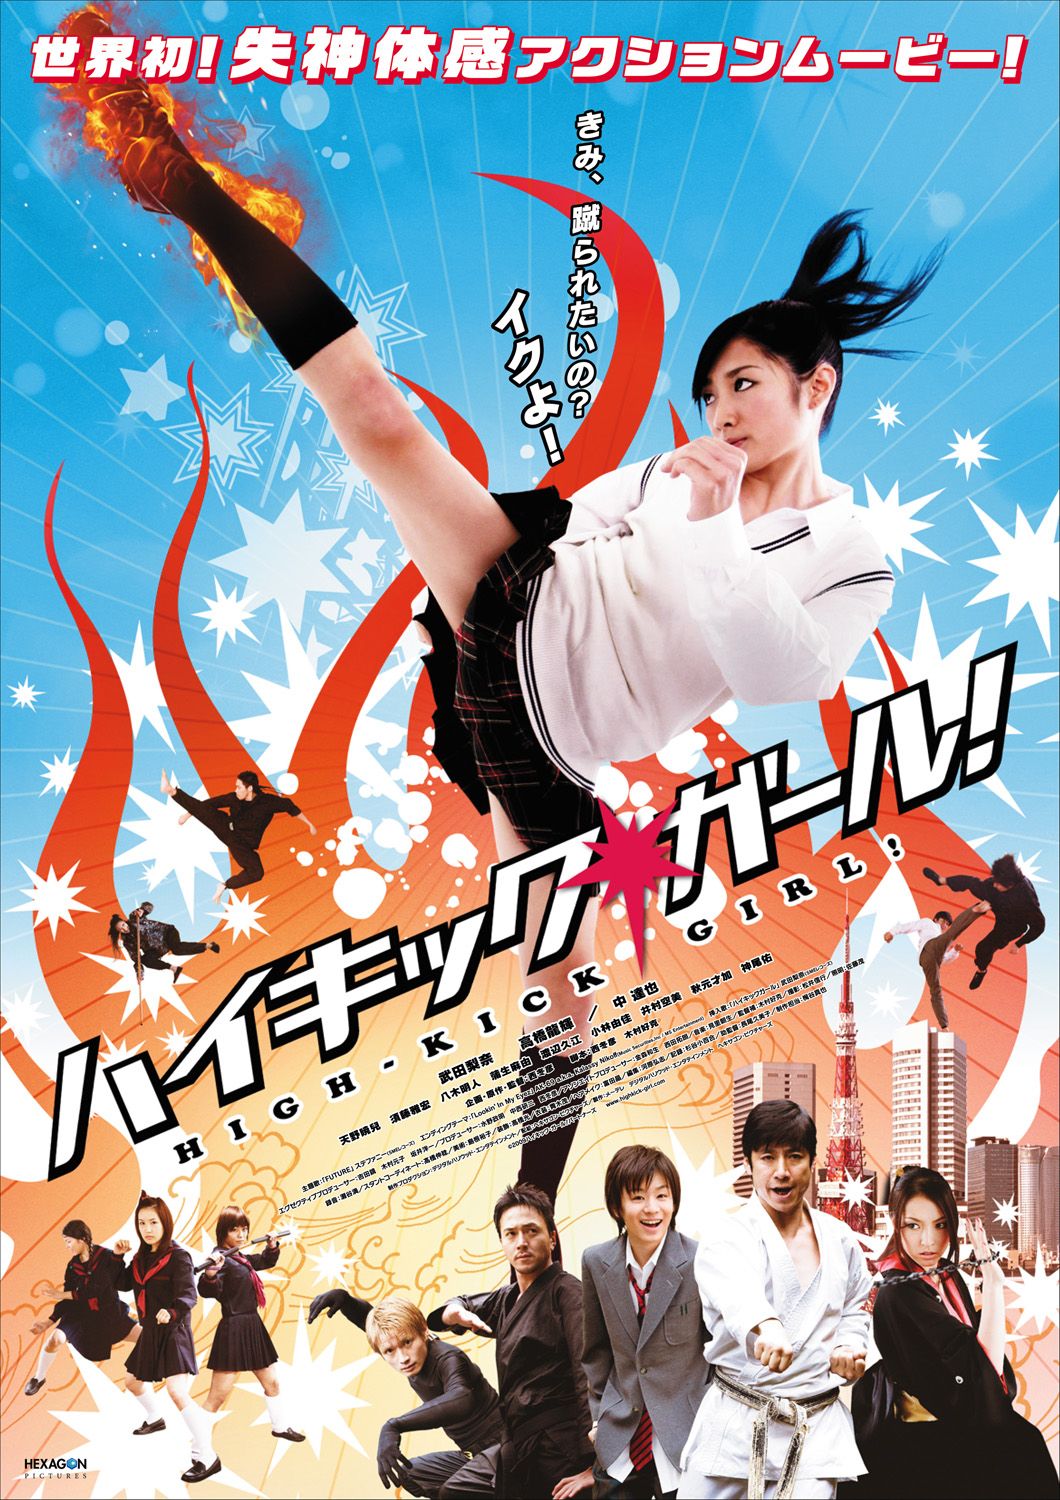 Extra Large Movie Poster Image for High-Kick Girl! 